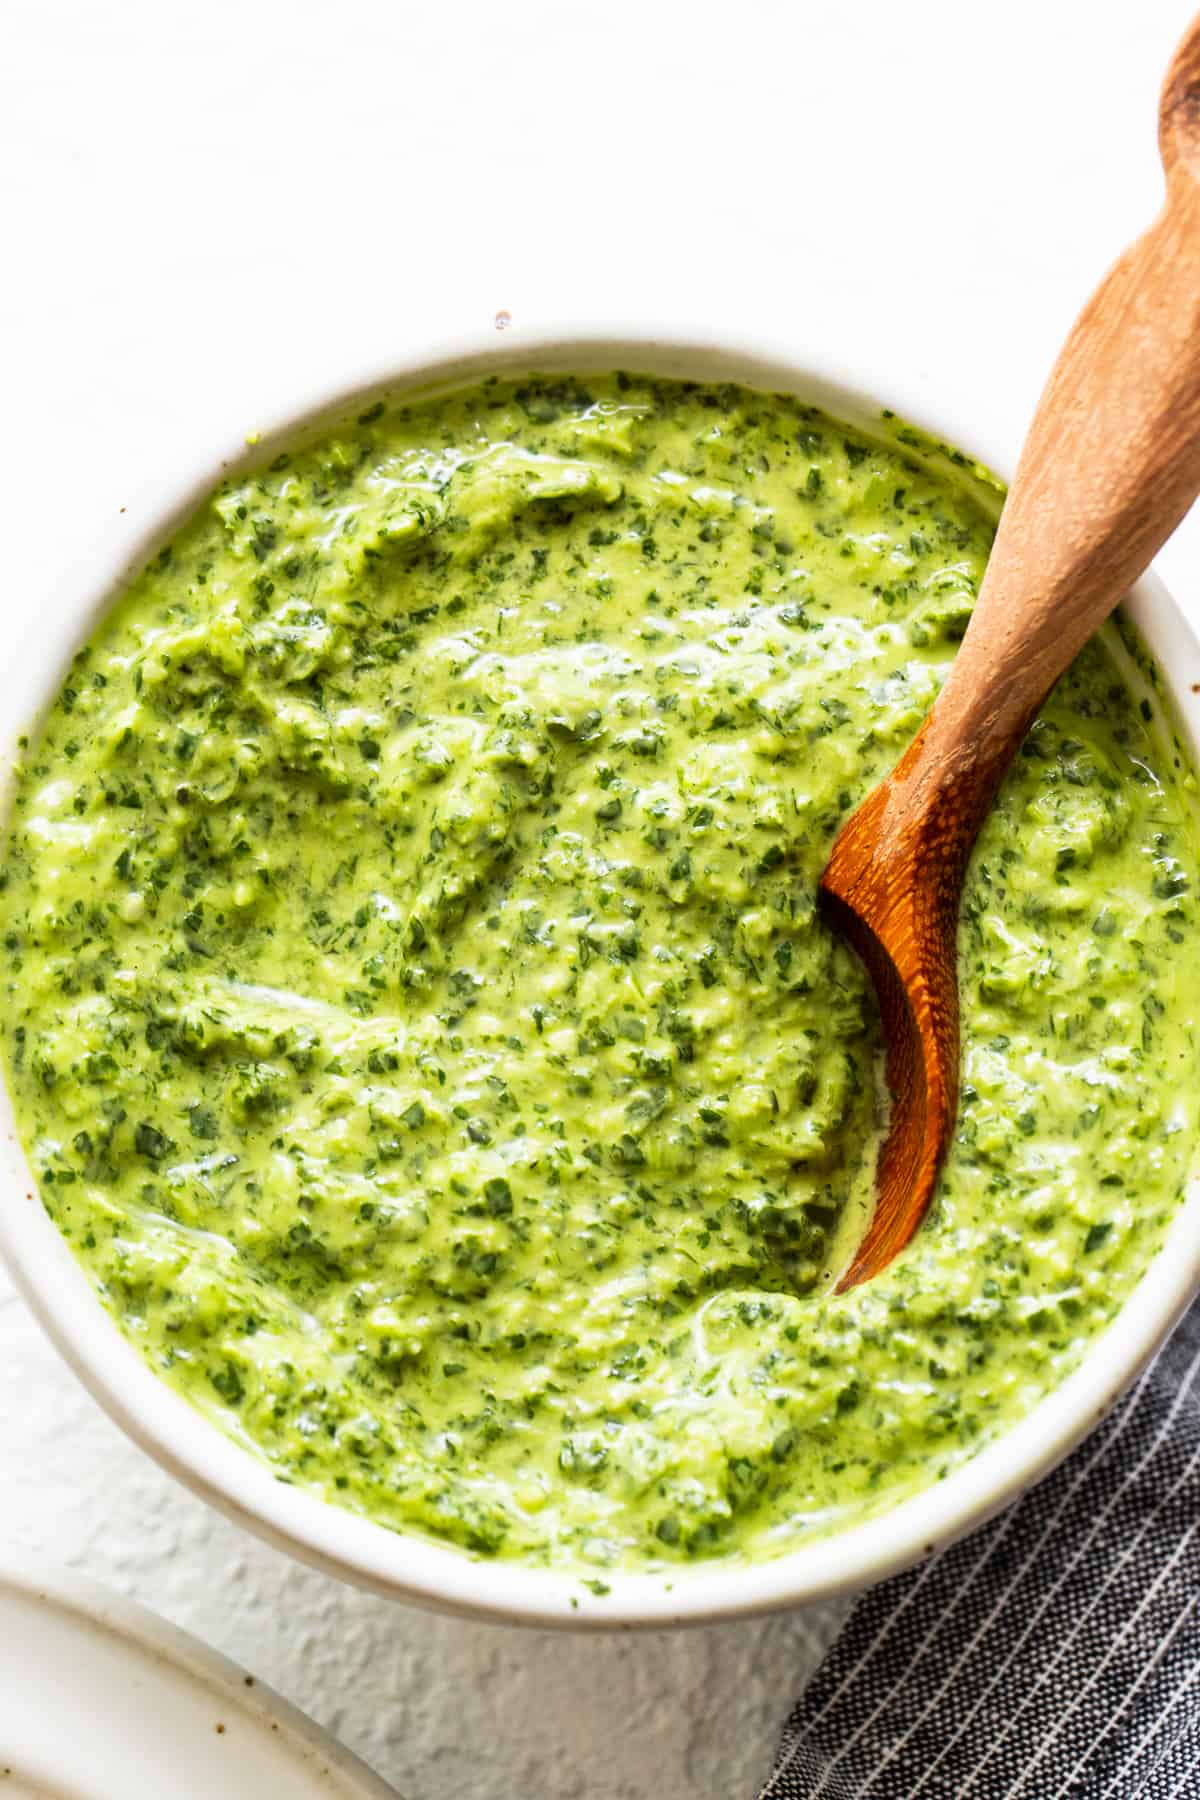 green sauce in bowl.